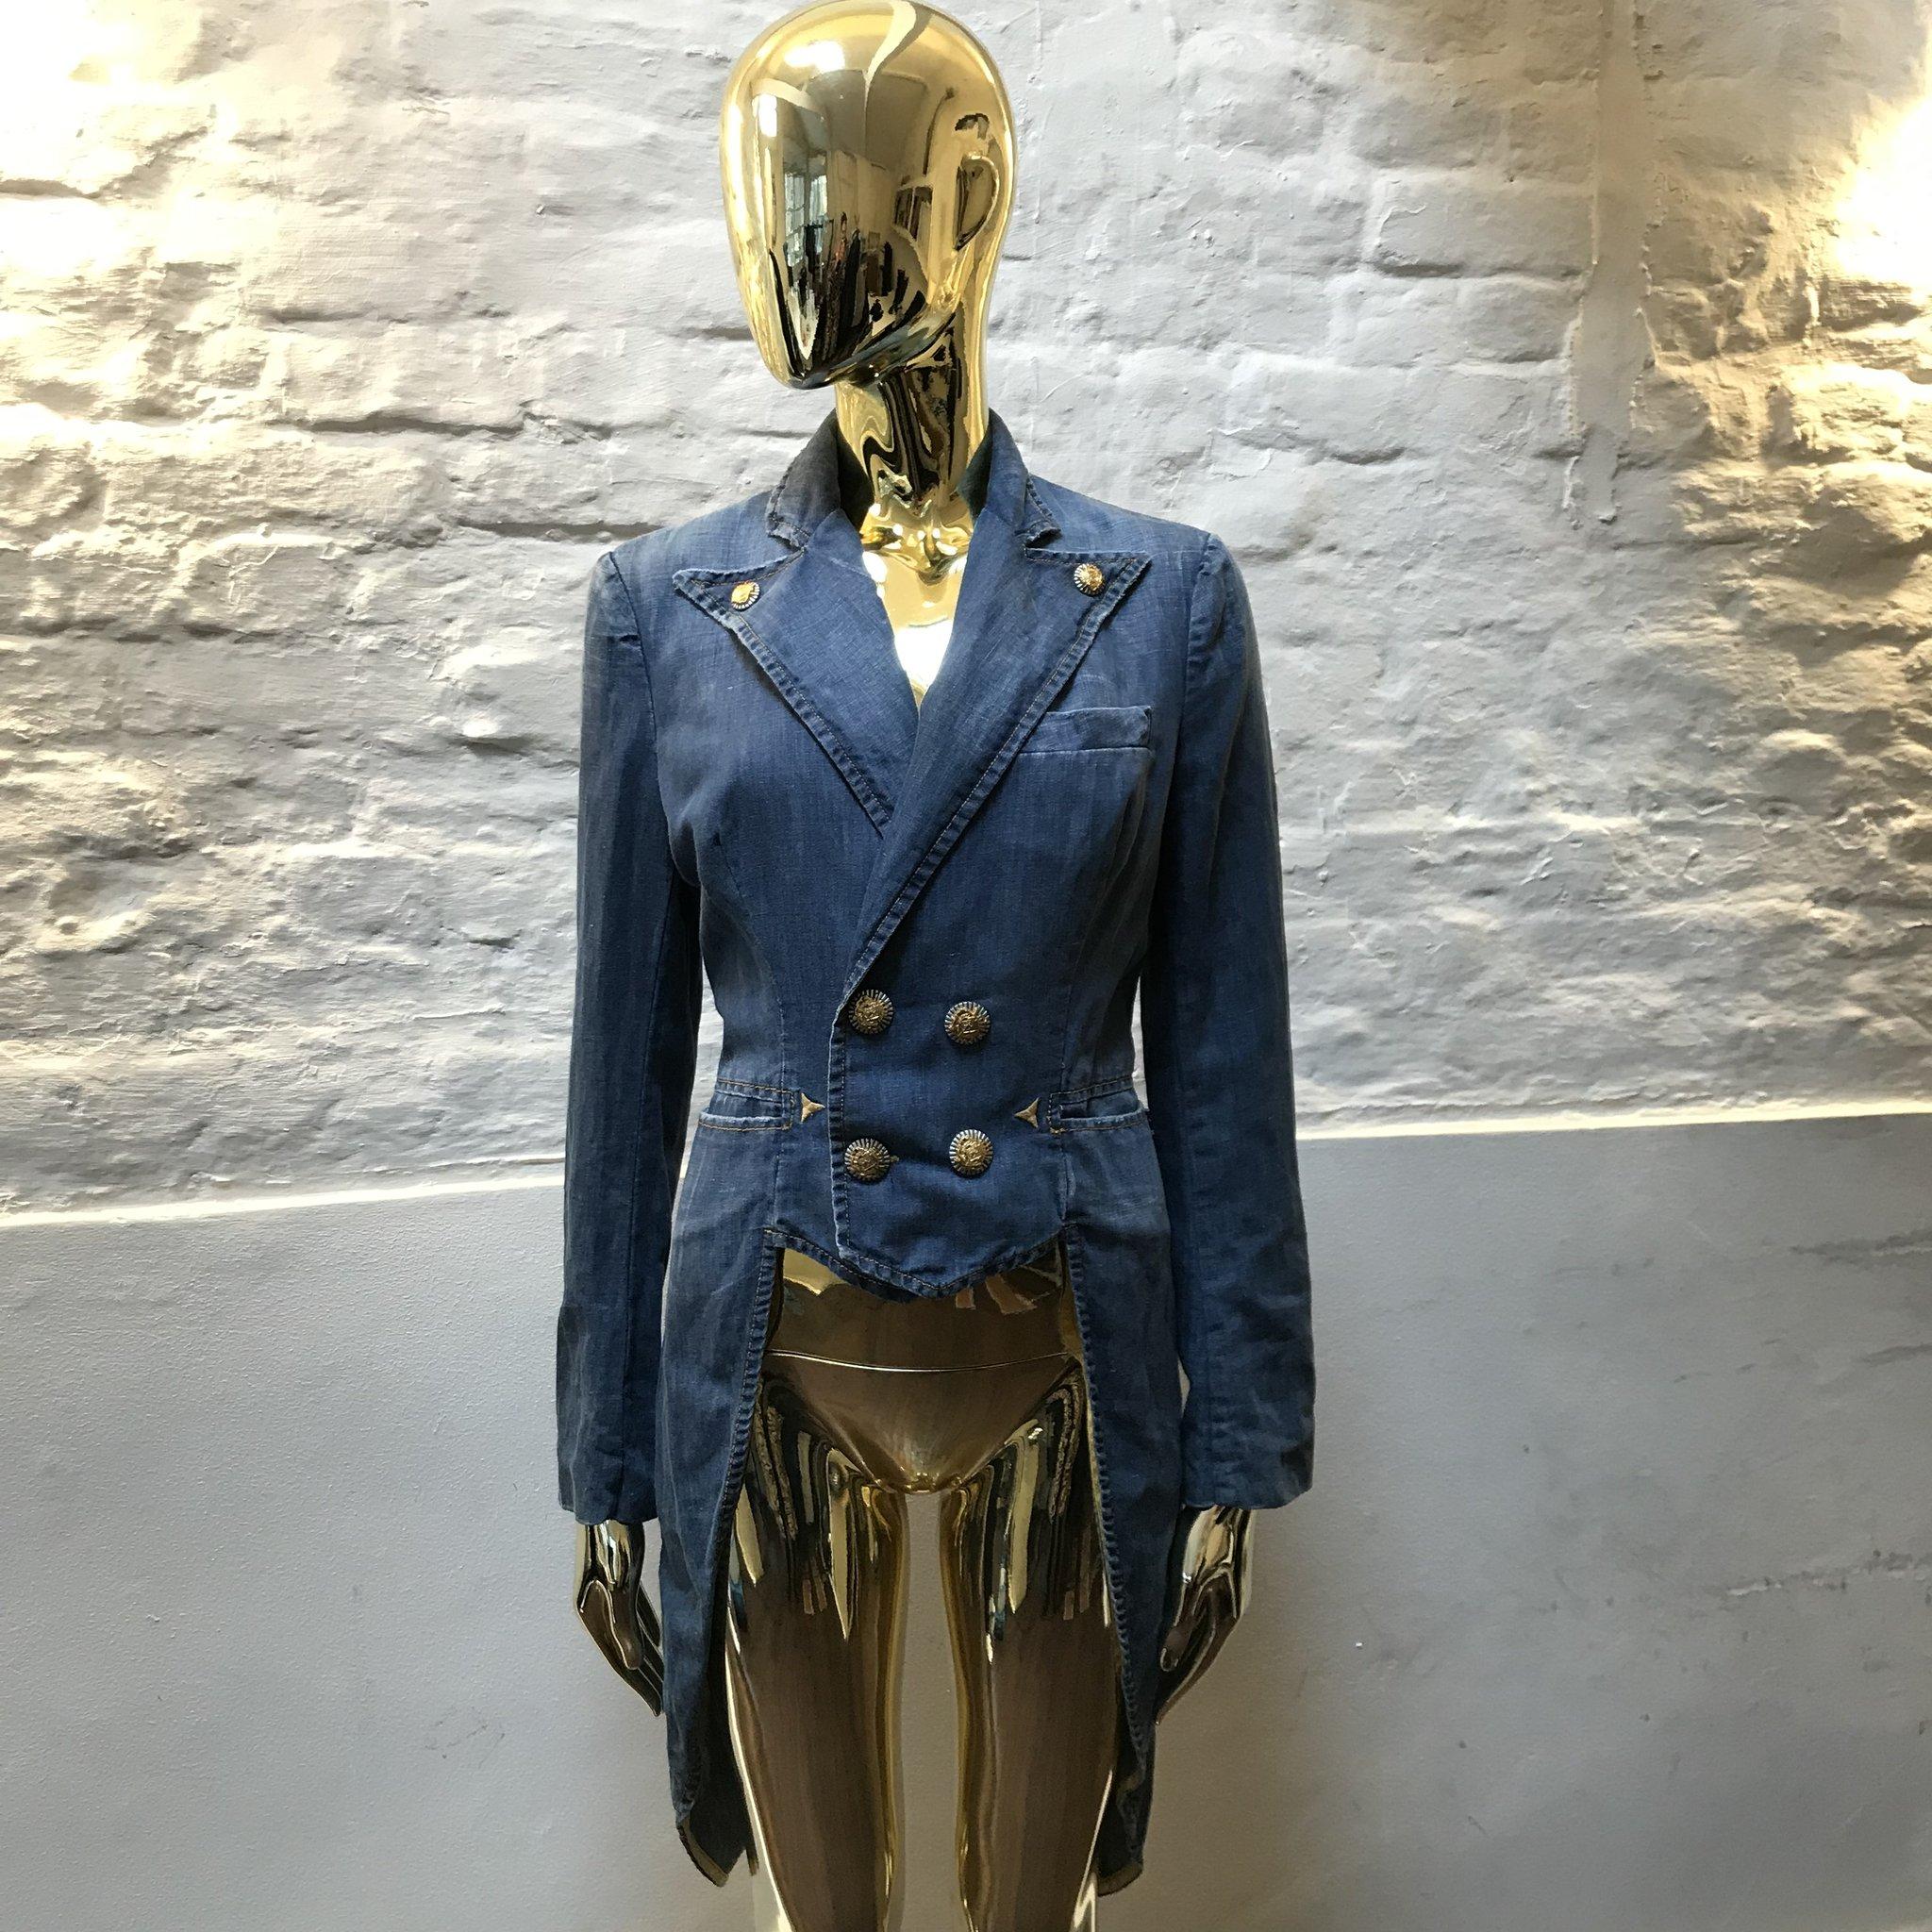 Jean Paul Gaultier Denim Dinner Jacket made in France. 

Jean Paul Gaultier disrupted the rarefied world of couture with his transgressive vision of beauty.

Inspired by punks, burlesque, screen goddesses, gender-benders, fetishists and subcultures